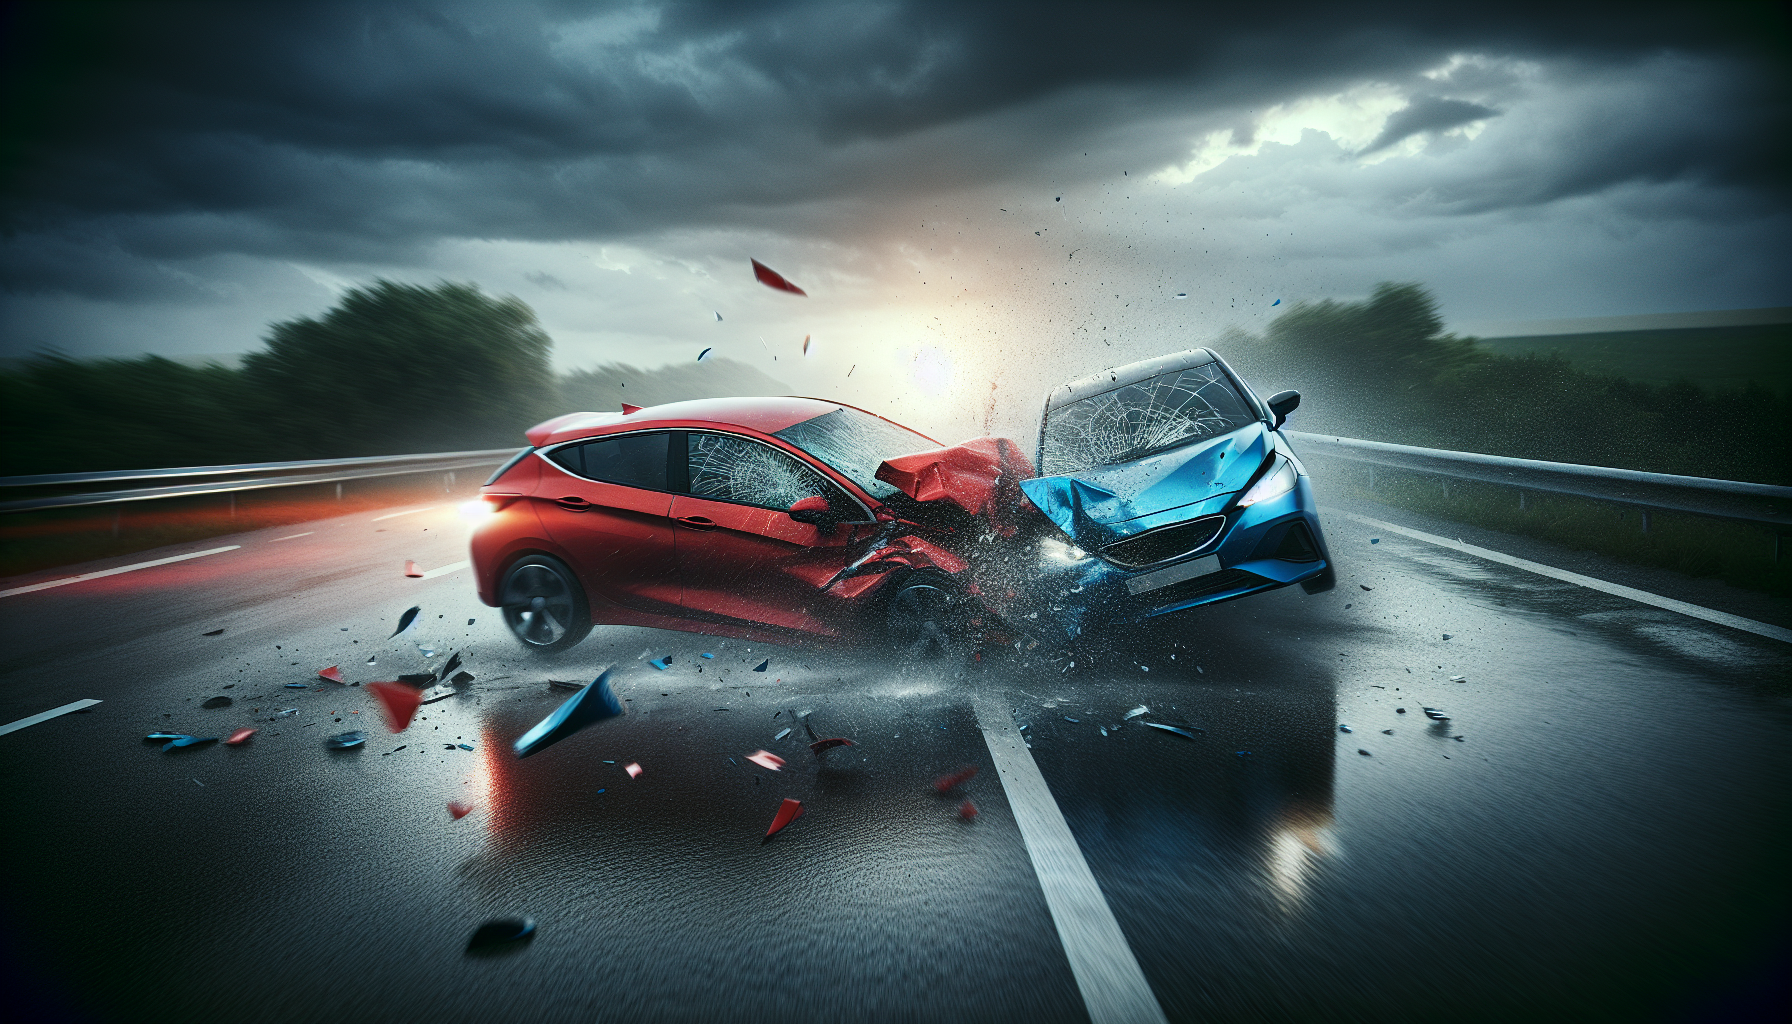 Illustration of two cars colliding on a road